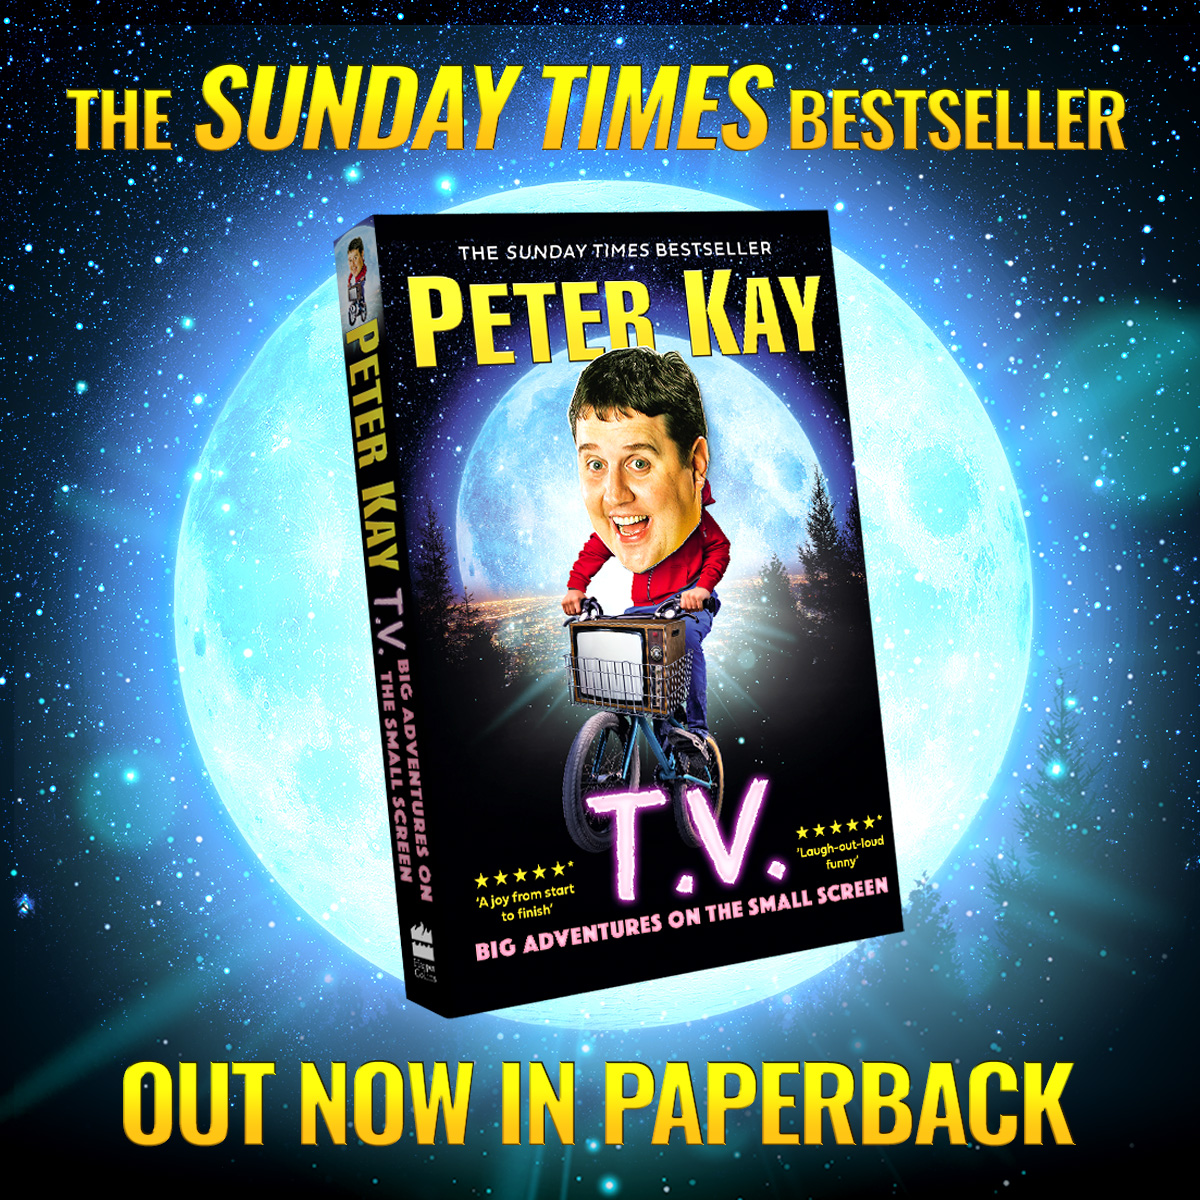 Peter’s brilliant Sunday Times bestselling autobiography T.V. Big Adventures on the Small Screen is now available in paperback. Sun, sea and T.V. It's the funniest book you’ll read this summer: lnk.to/peterkay